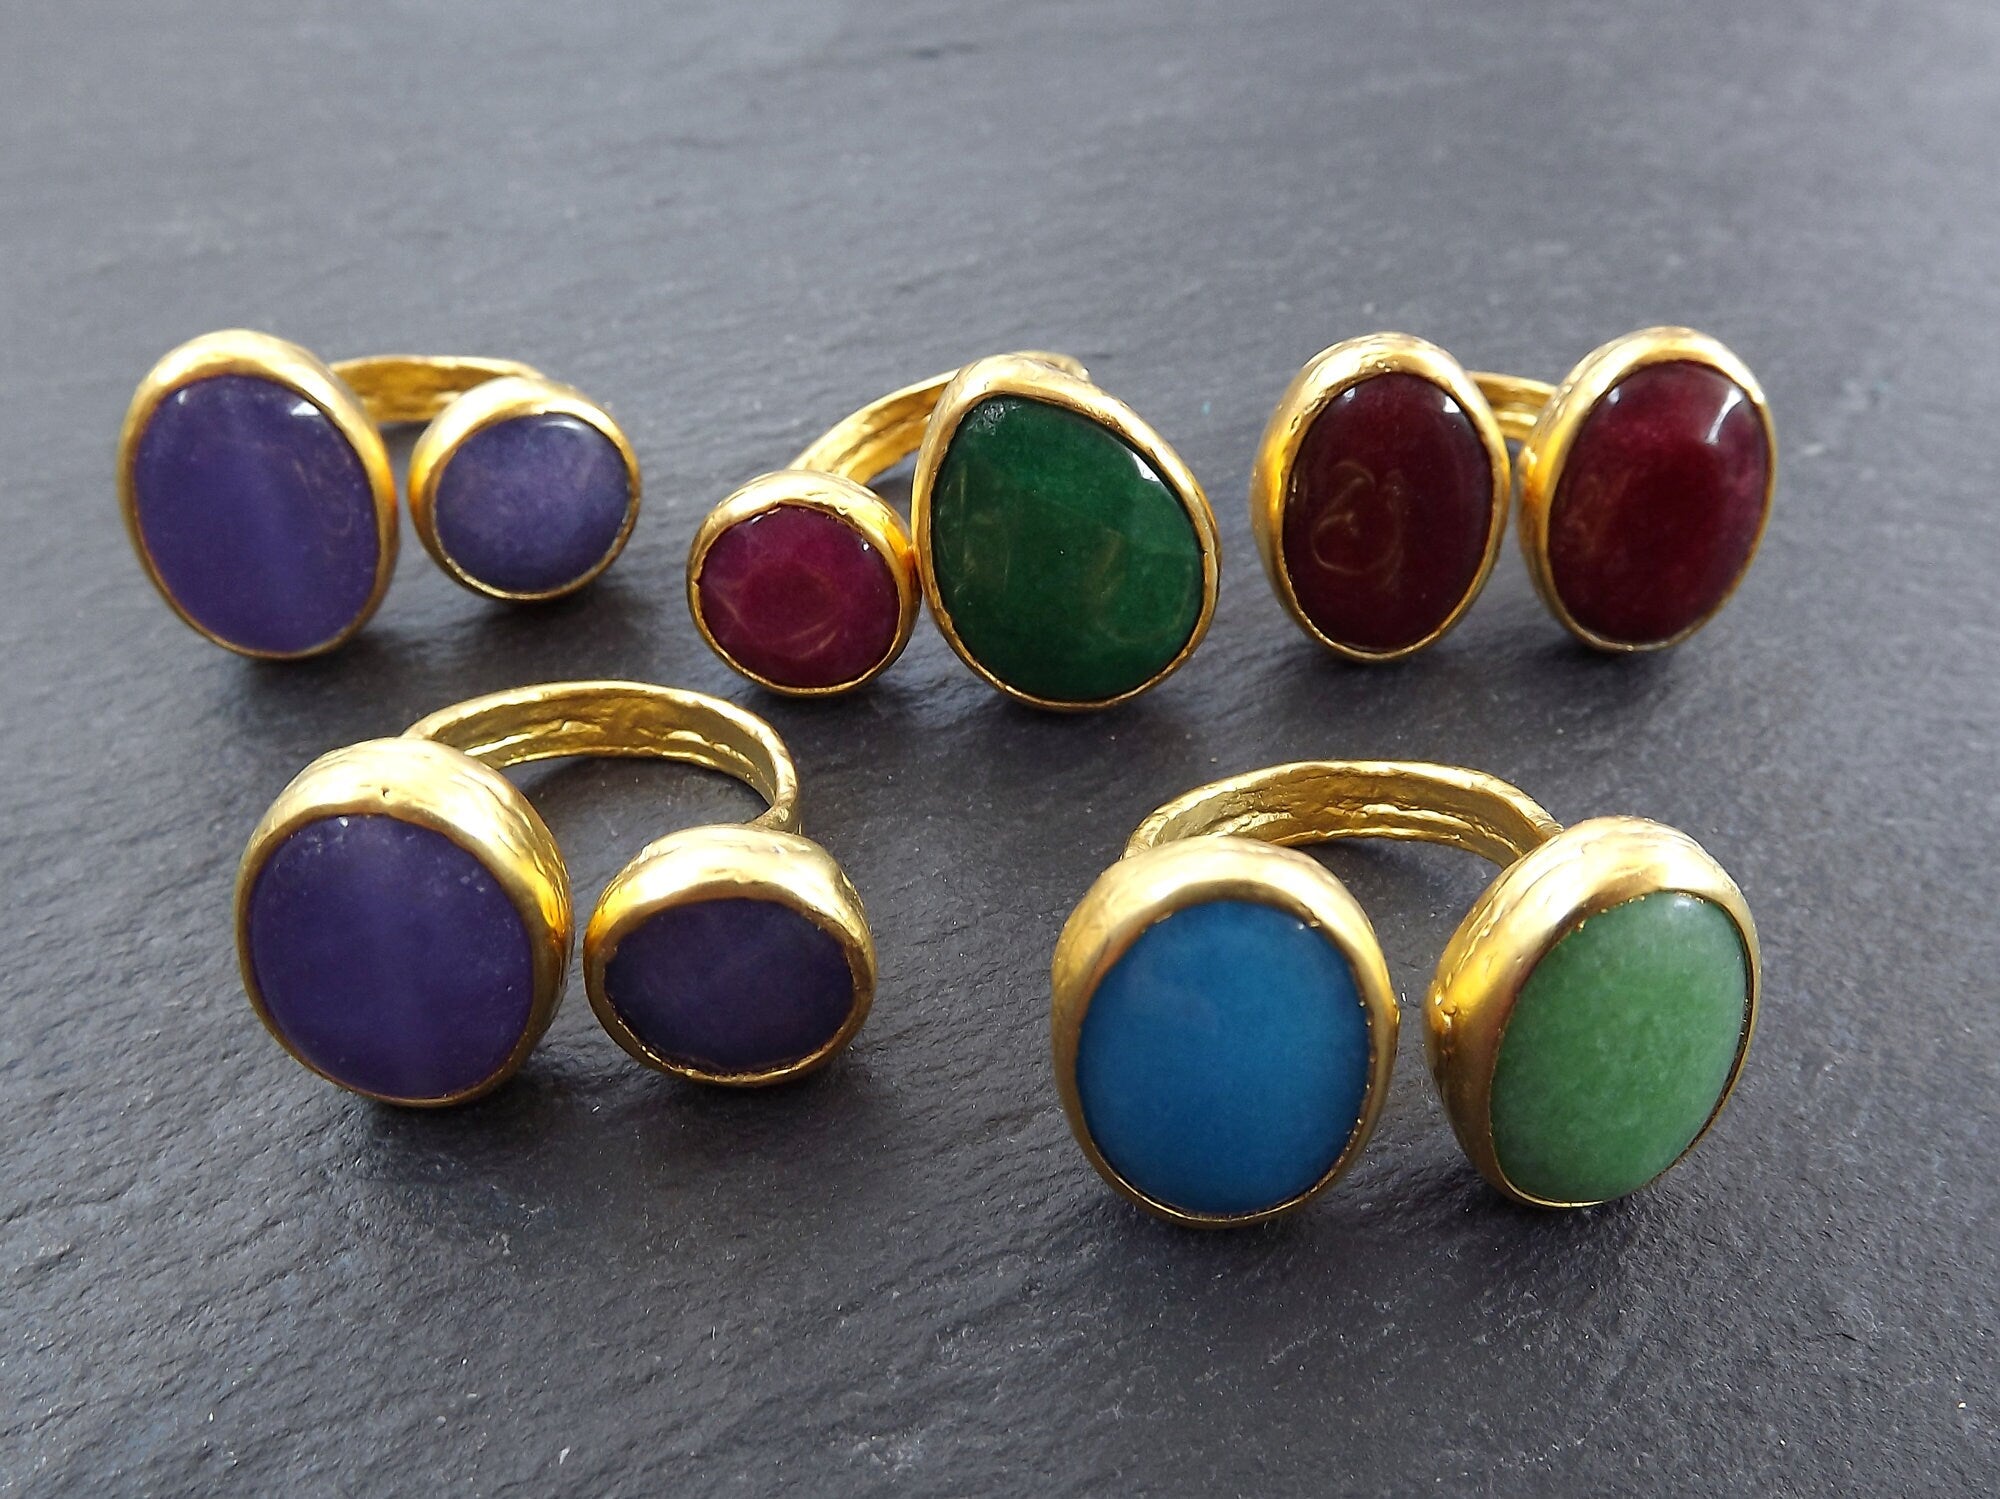 Wholesale Rings, Mix Jade Stone Double Rings Loops, Faceted Jade gemstones, Hammered Multicolor Turkish 22k Gold plated Bezel - LOT 9 5pcs